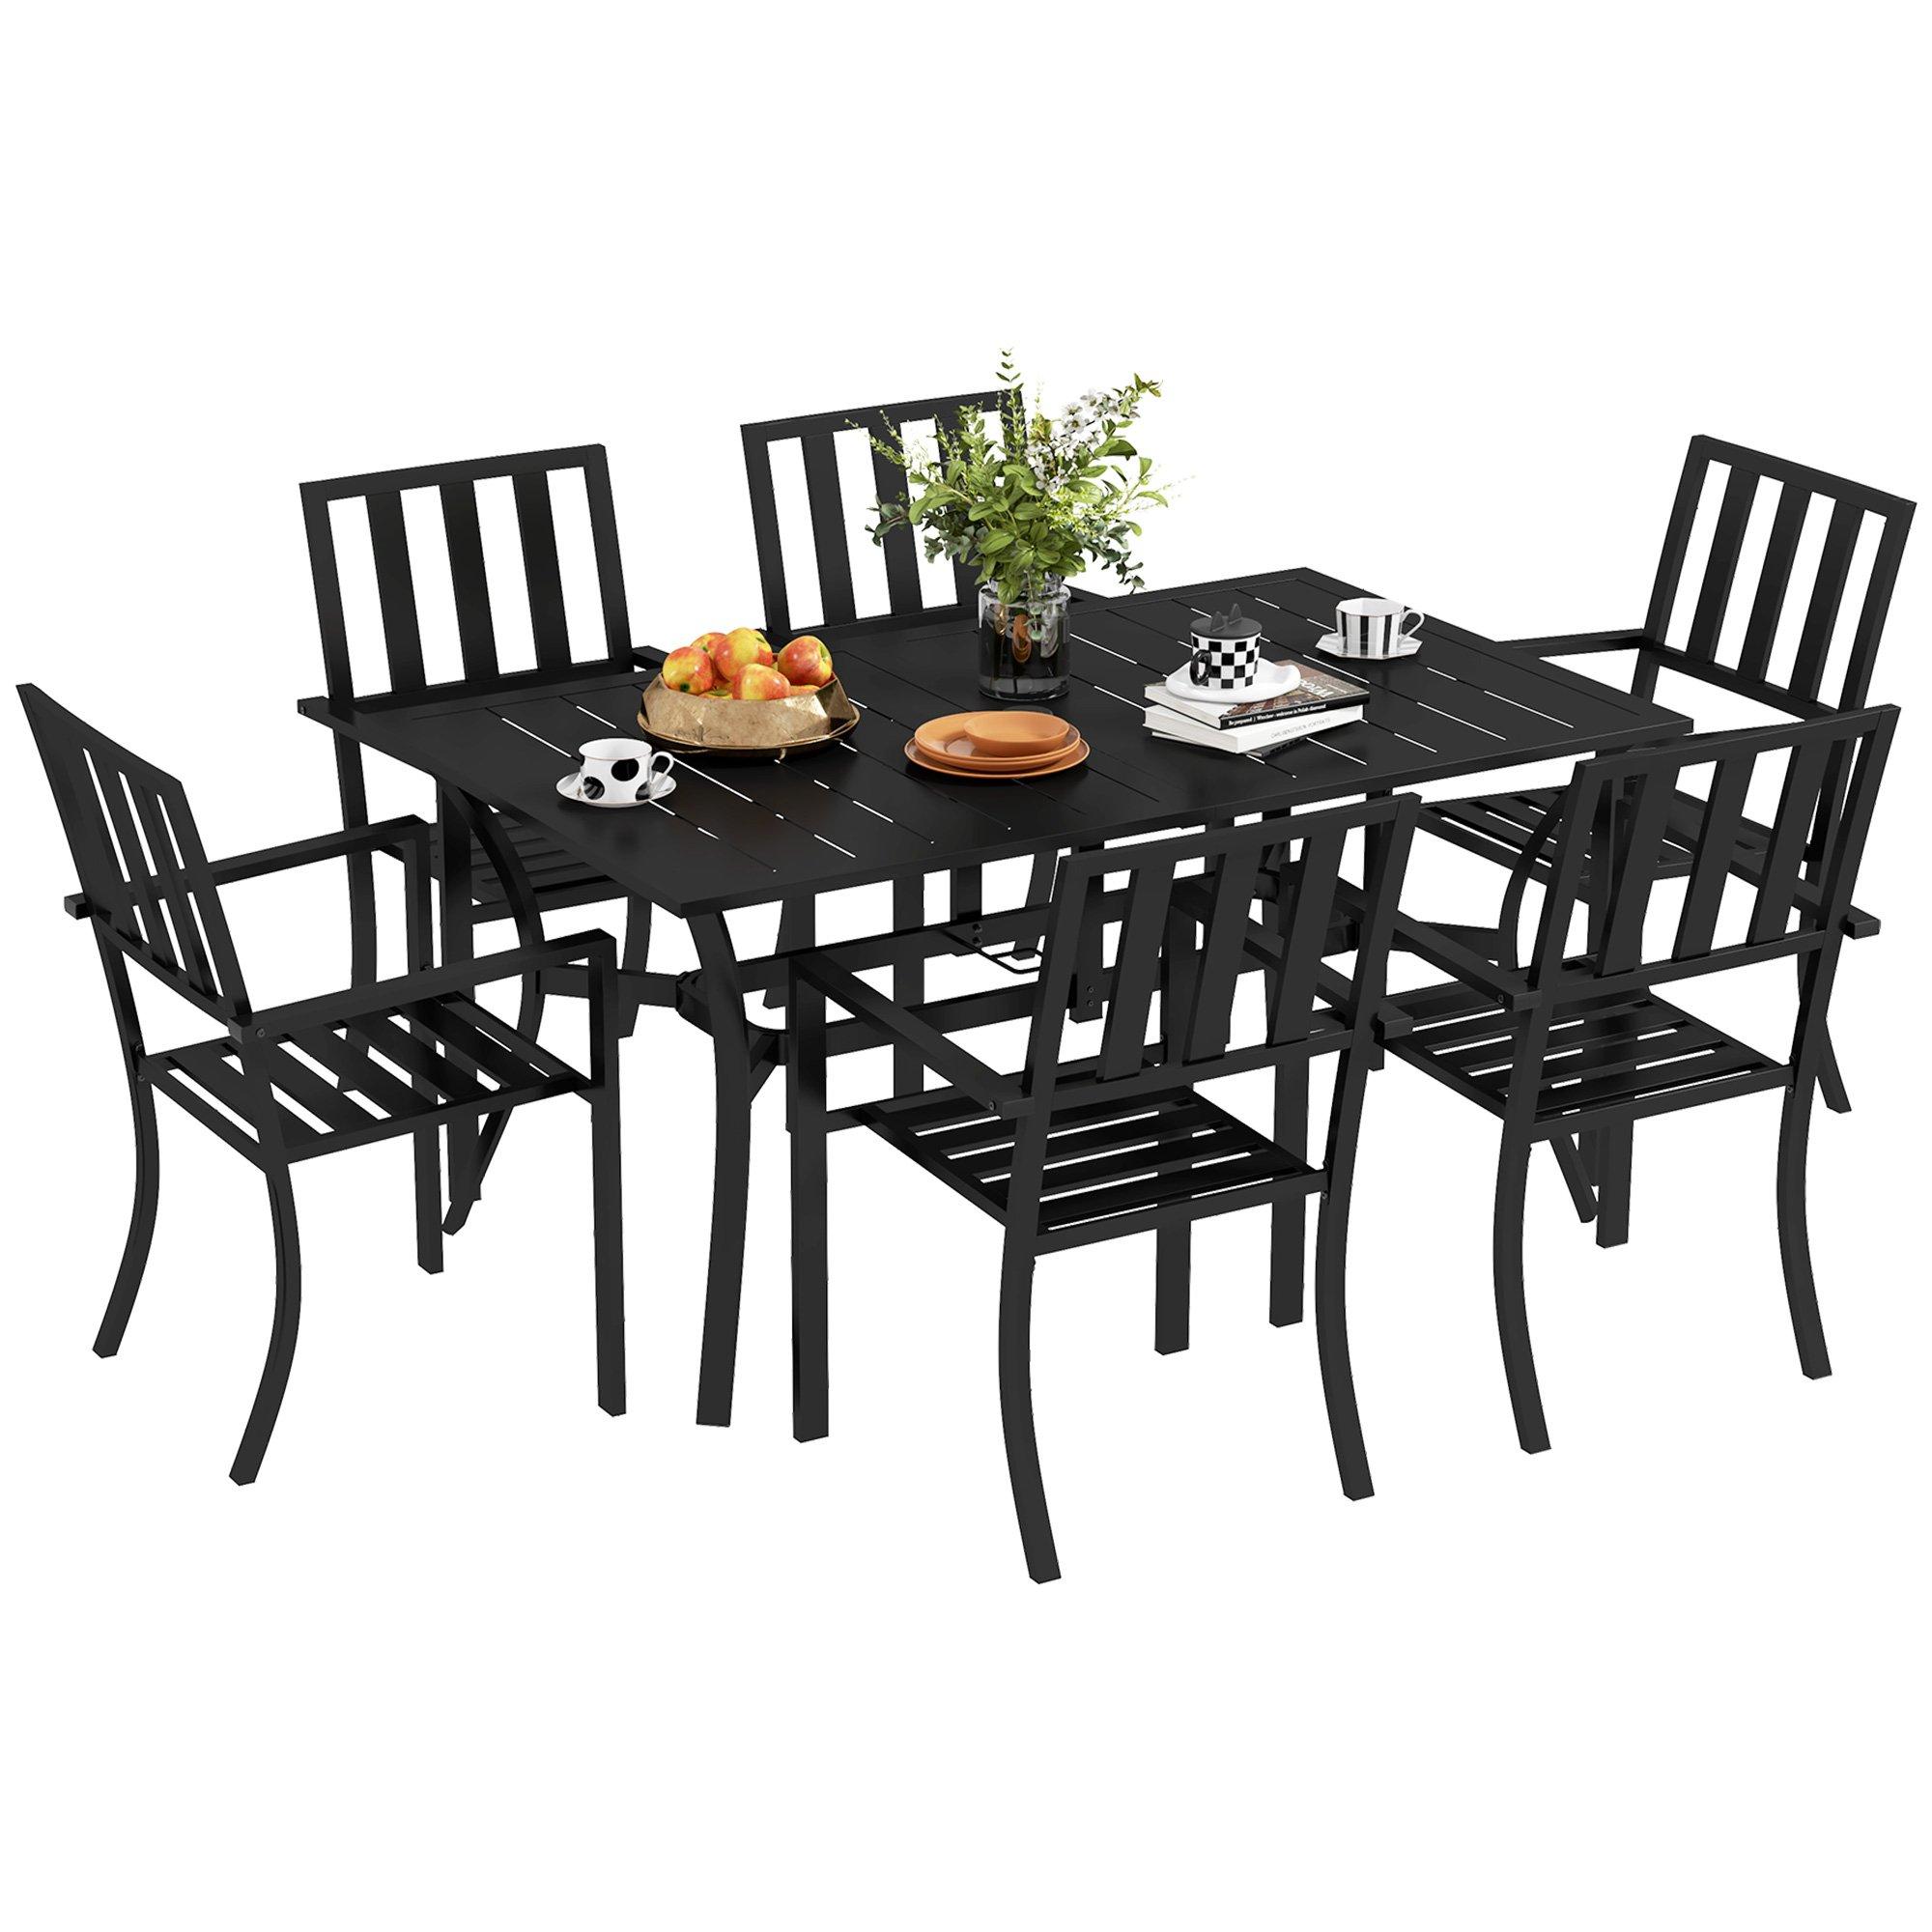 7 Pieces Patio Dining Set 6 Seater Outdoor Table and Chairs w/ Umbrella Hole